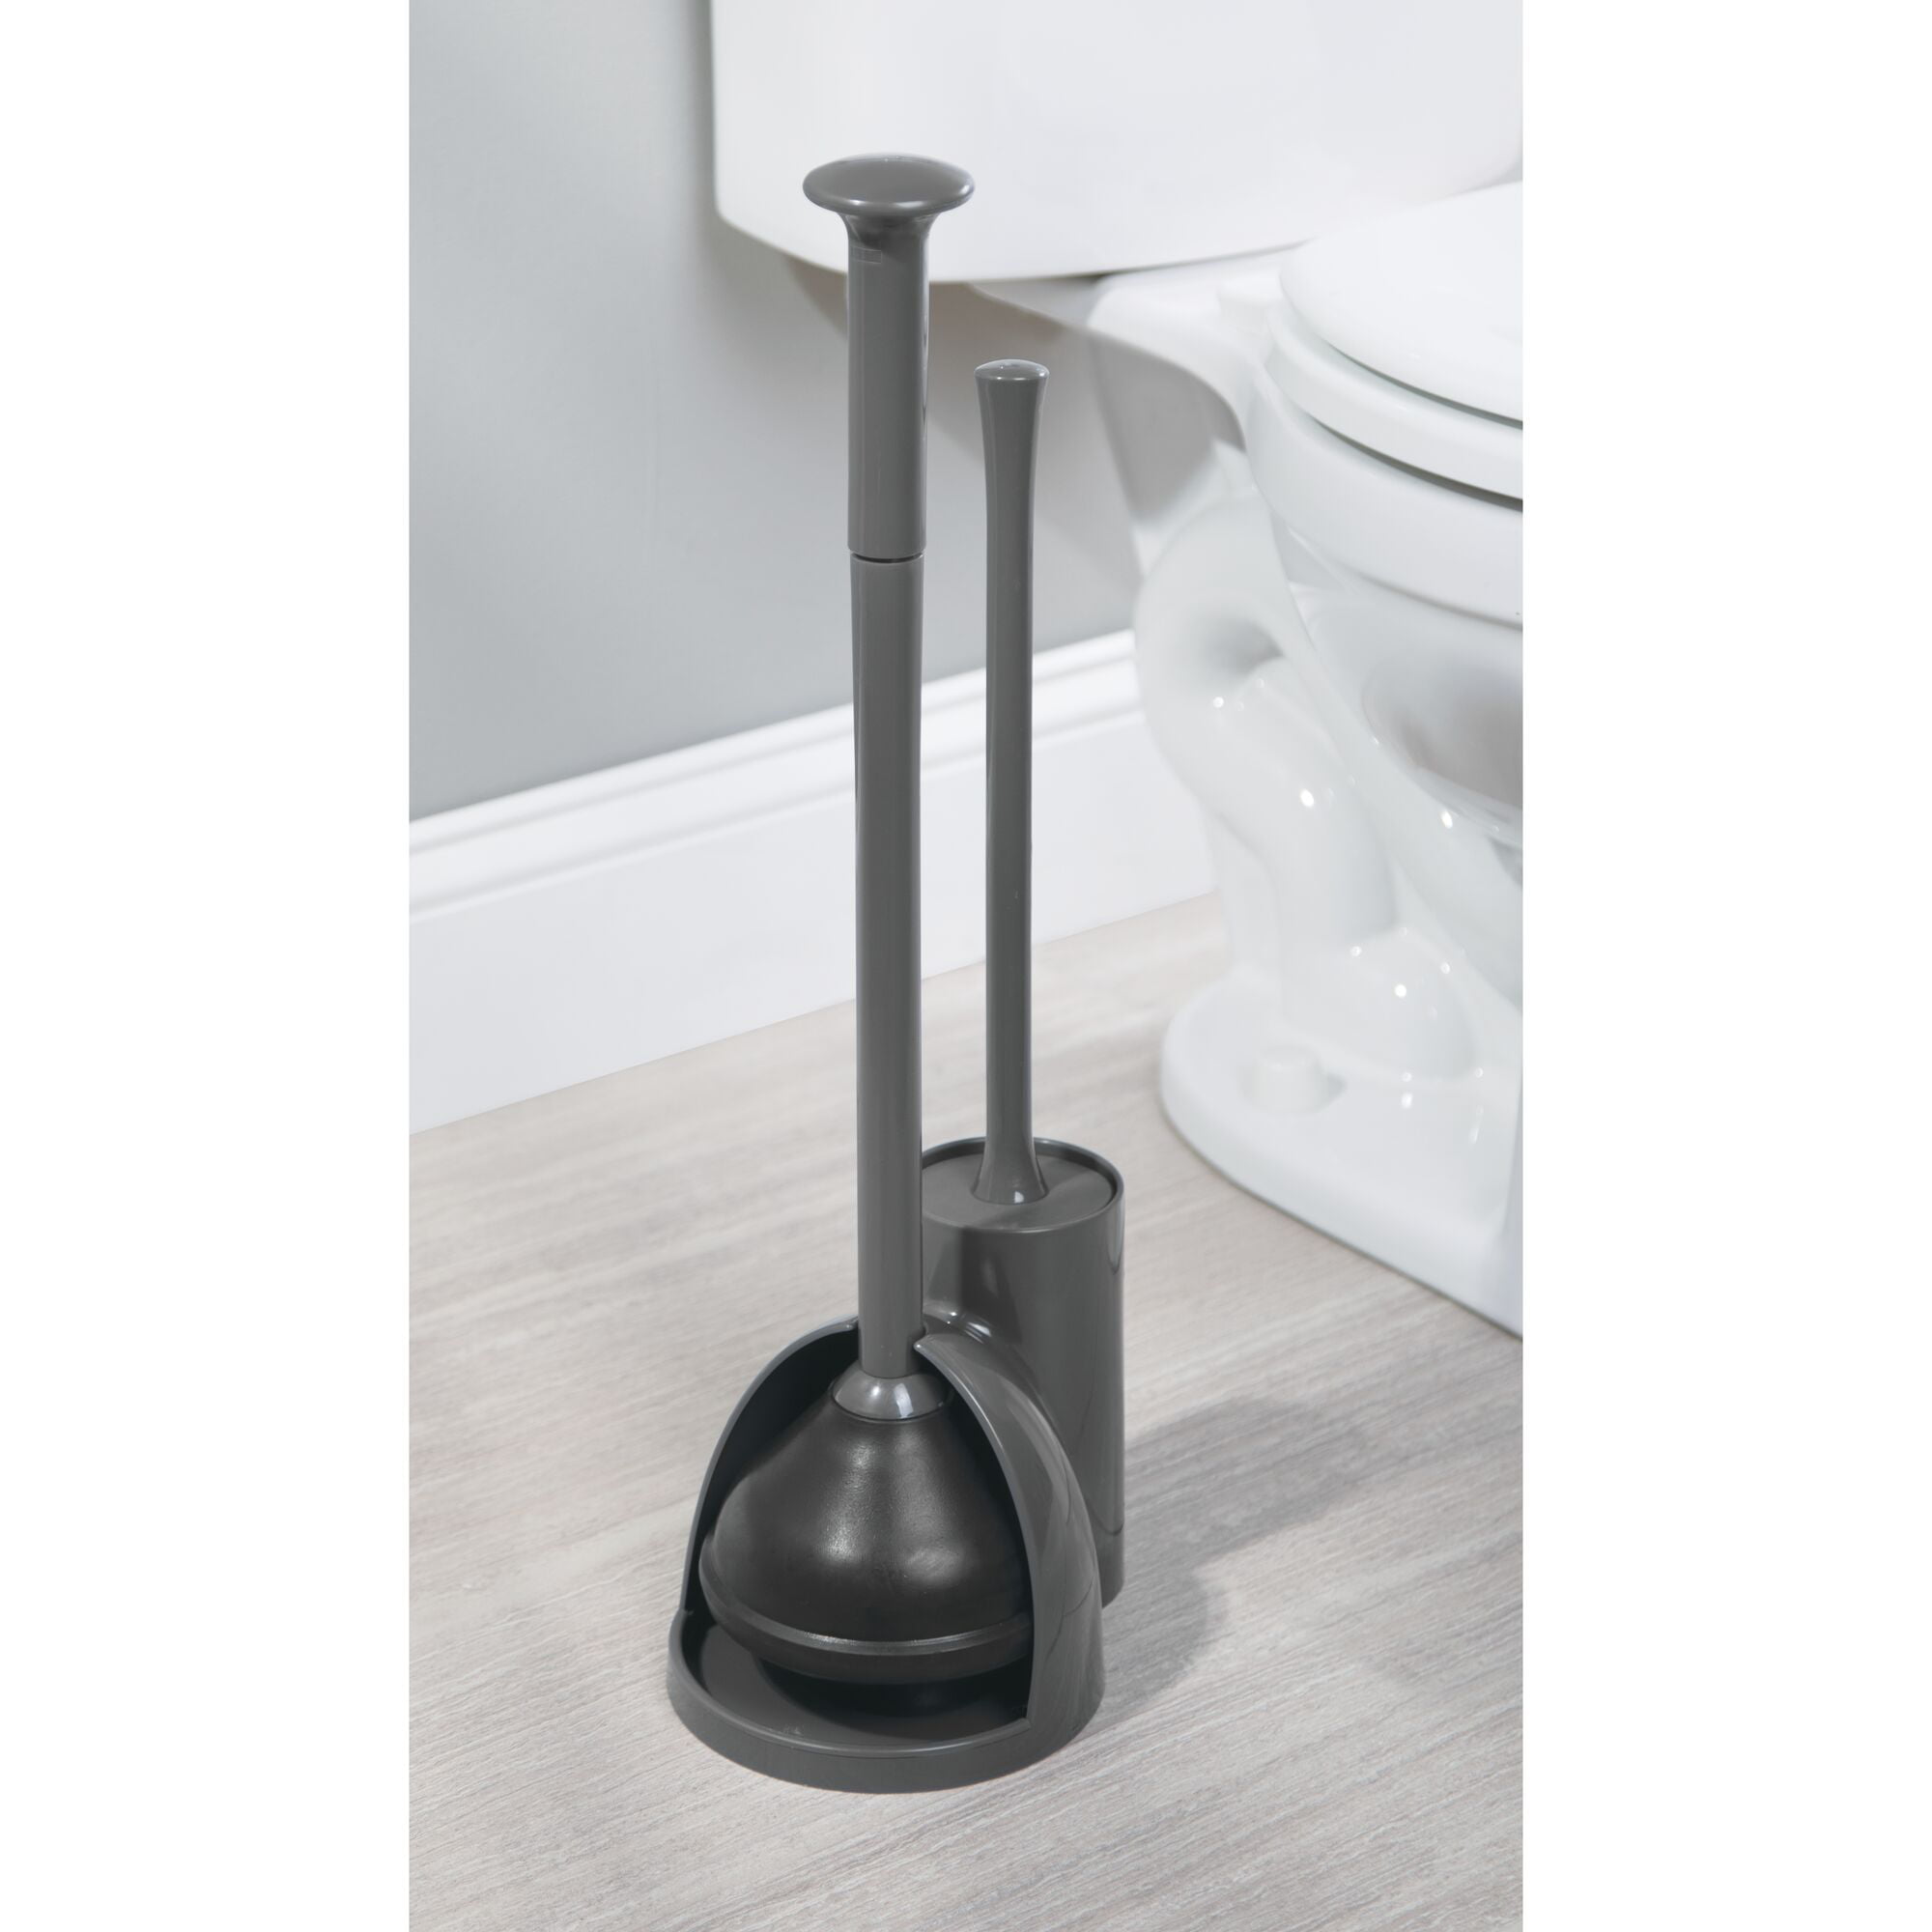 E5be Toilet Plunger And Bowl Brush Combo With Leak-proof Base